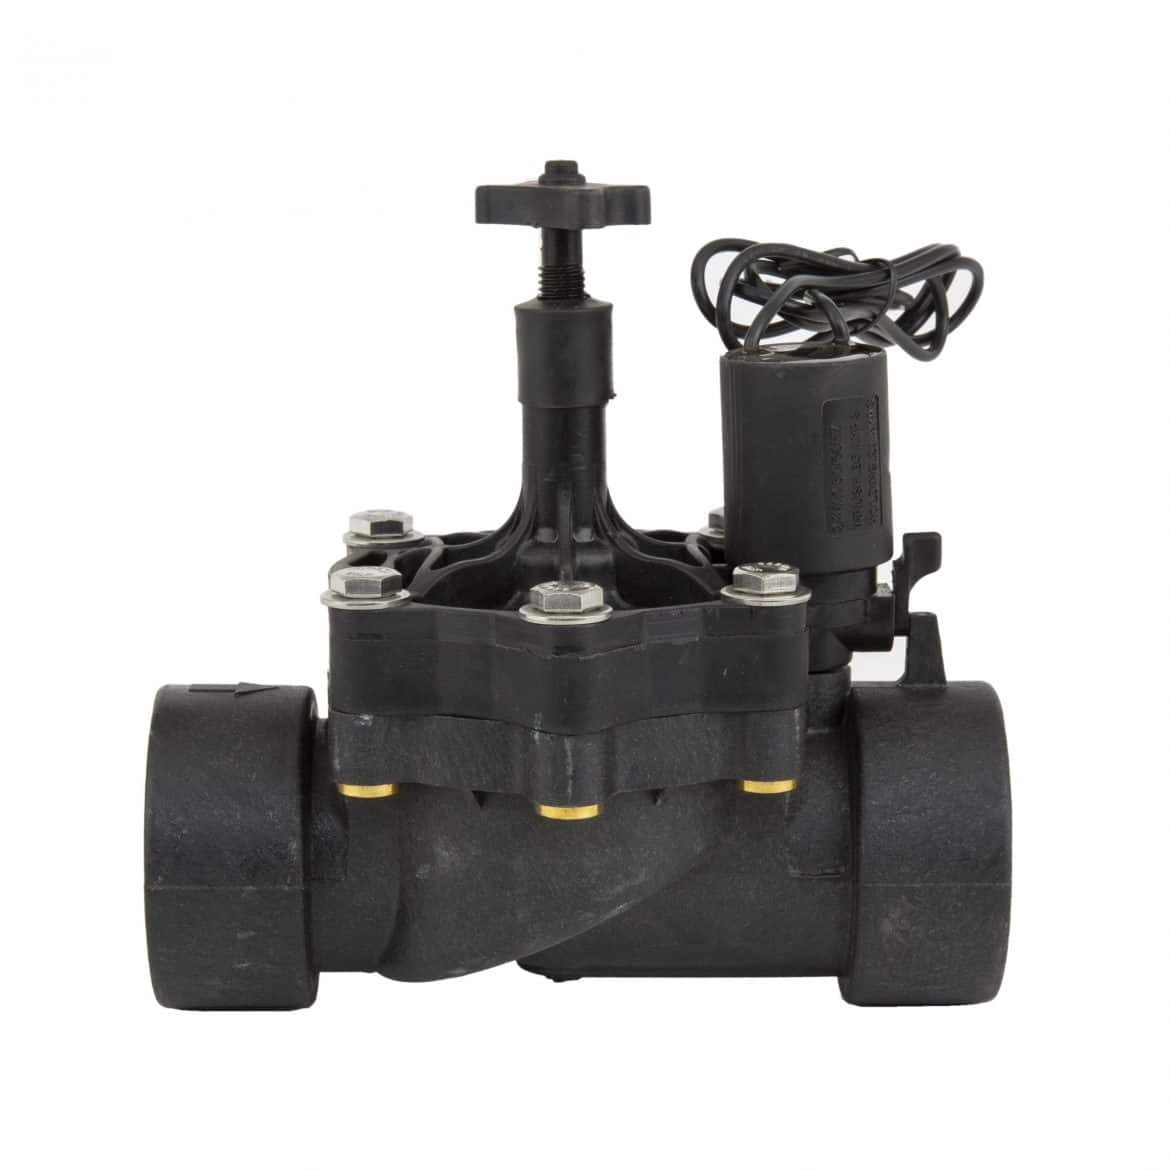 The Landscape Products VP series plastic remote control valves are ideal for use in residential and commercial applications. These valves are also suitable for non-potable installations and the innovative metering design keeps the valve working and maintenance to a minimum. Reverse flow design Reverse flow provides zero pressure stress on the diaphragm for long life Should the valve fail, it will fail in the closed position thereby preventing wasted water Internal manual bleed Simple, one-piece molded diaphragm Bleed water is metered through innovative flow passages to provide contamination resistance Reinforced ribbed bonnet for surge protection Ideal for low volume drip irrigation zones Easily removable handle prevents tampering after the flow adjustment